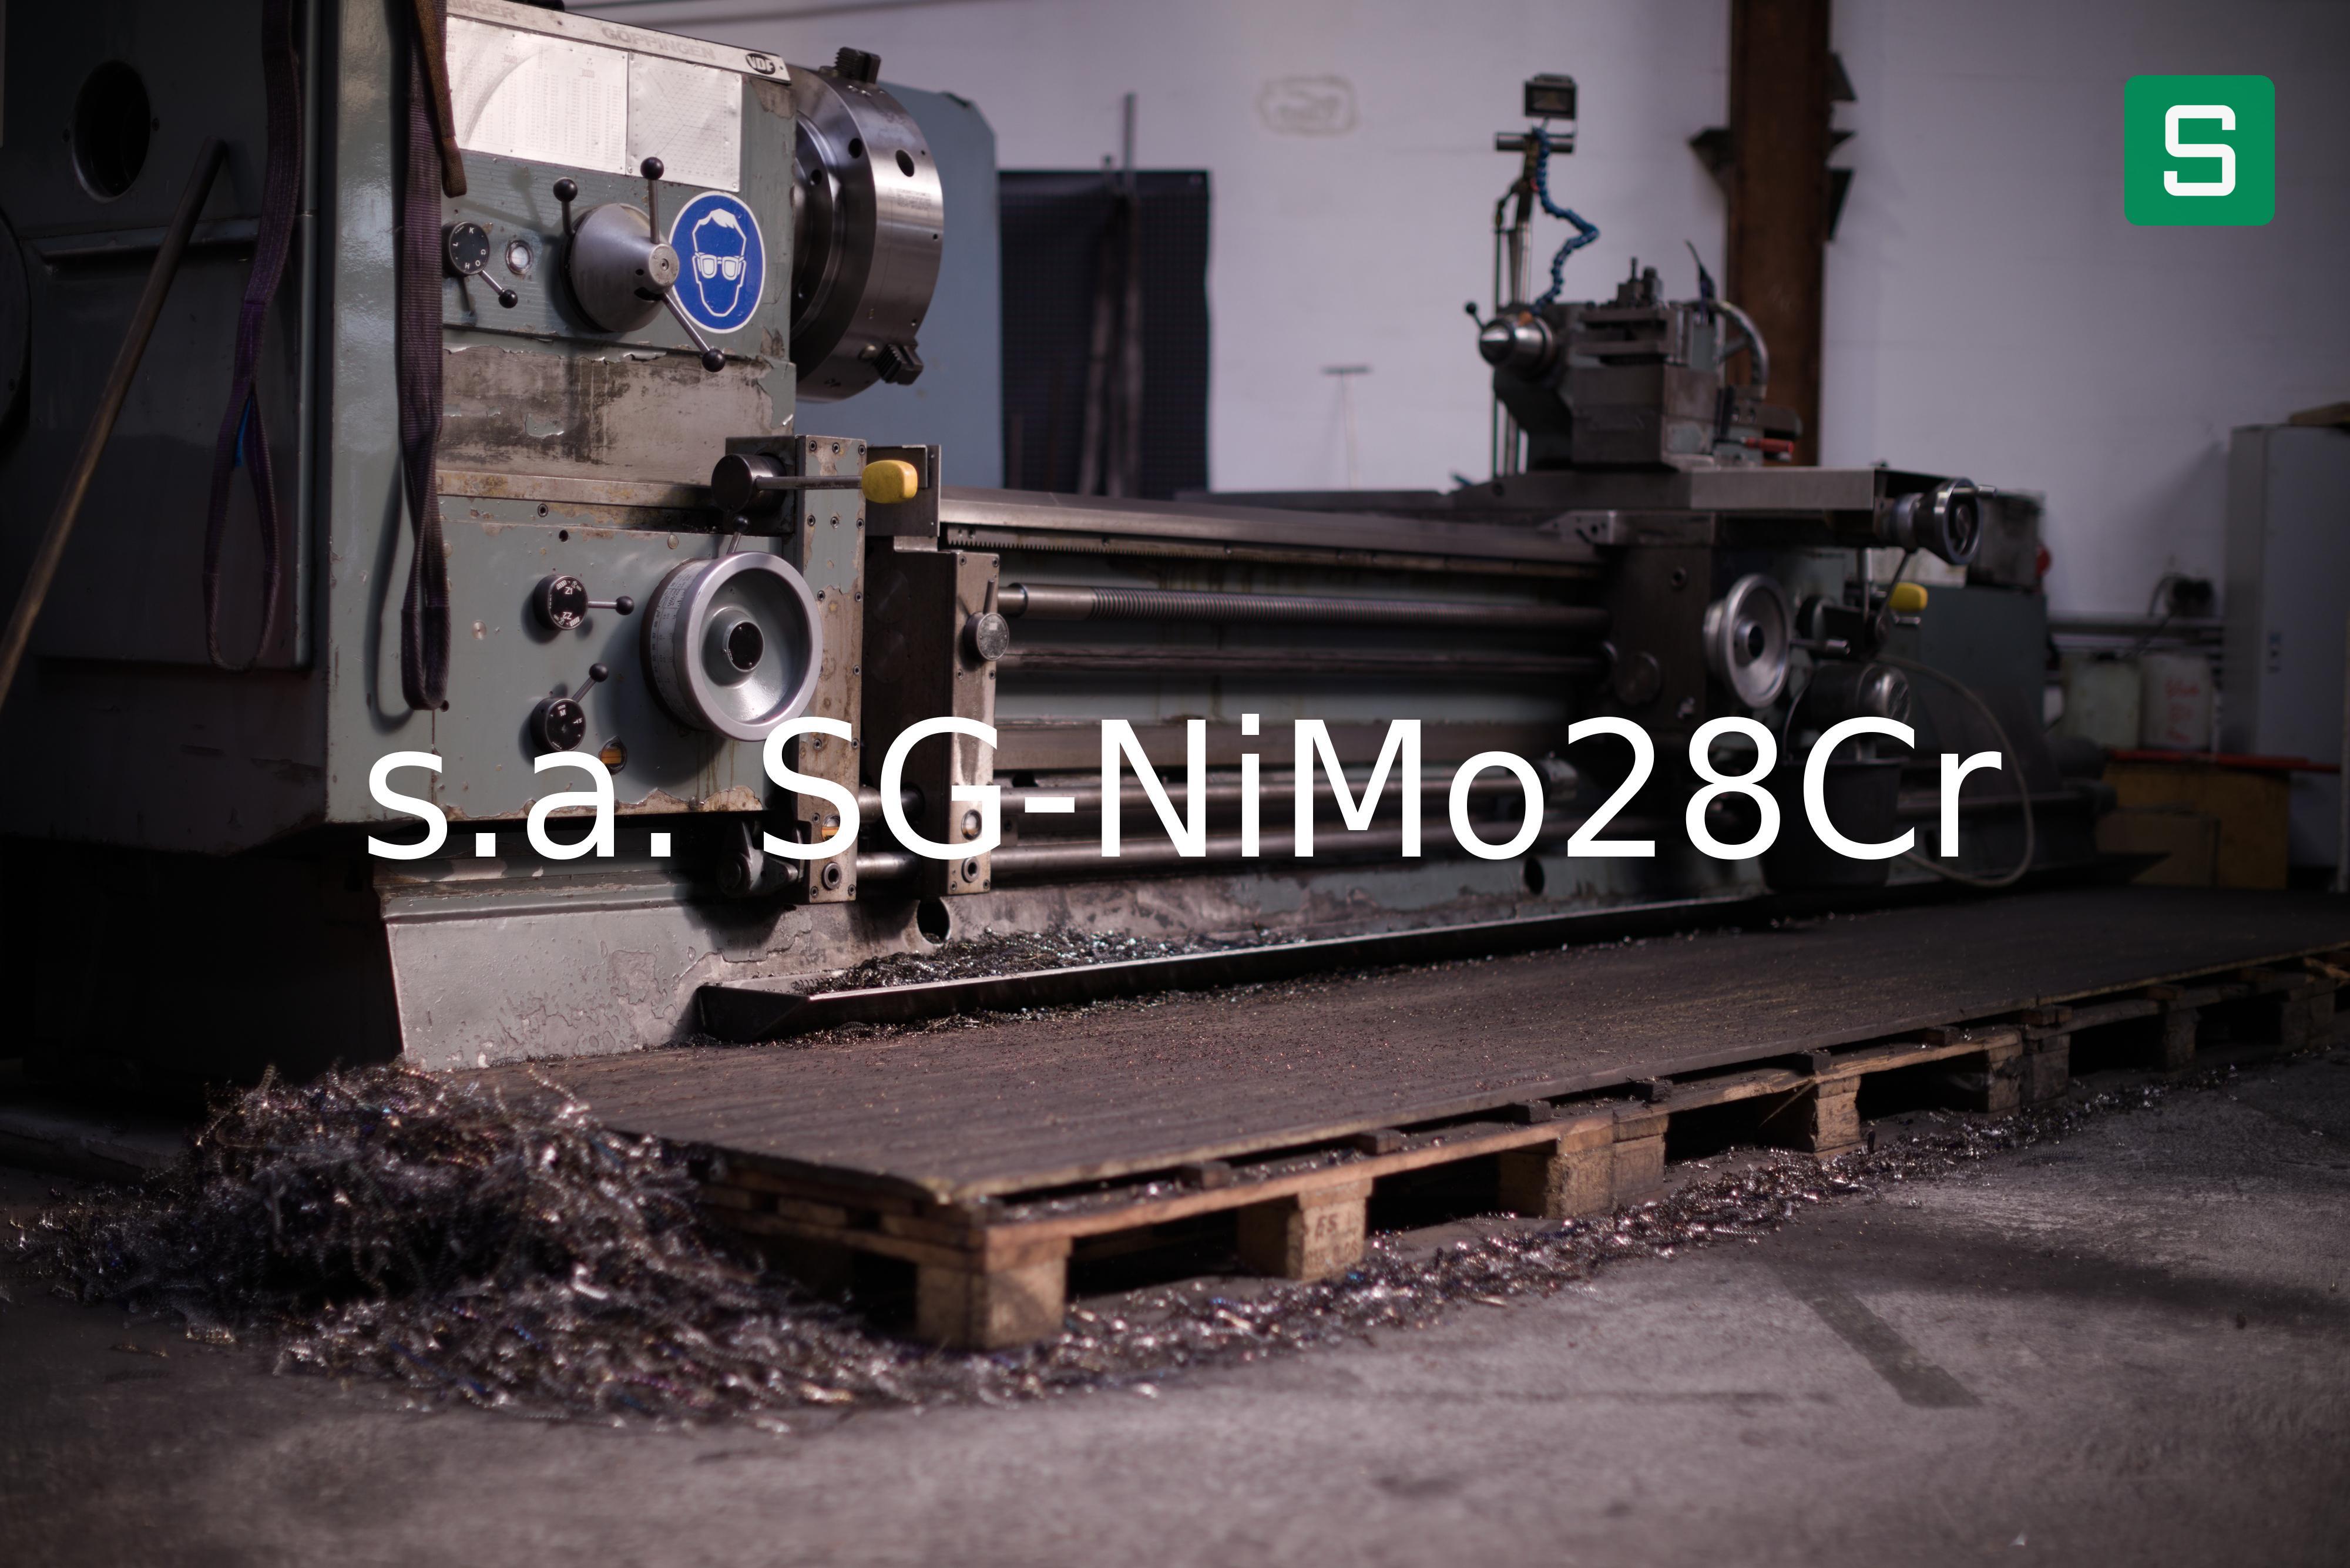 Stahlwerkstoff: s.a. SG-NiMo28Cr